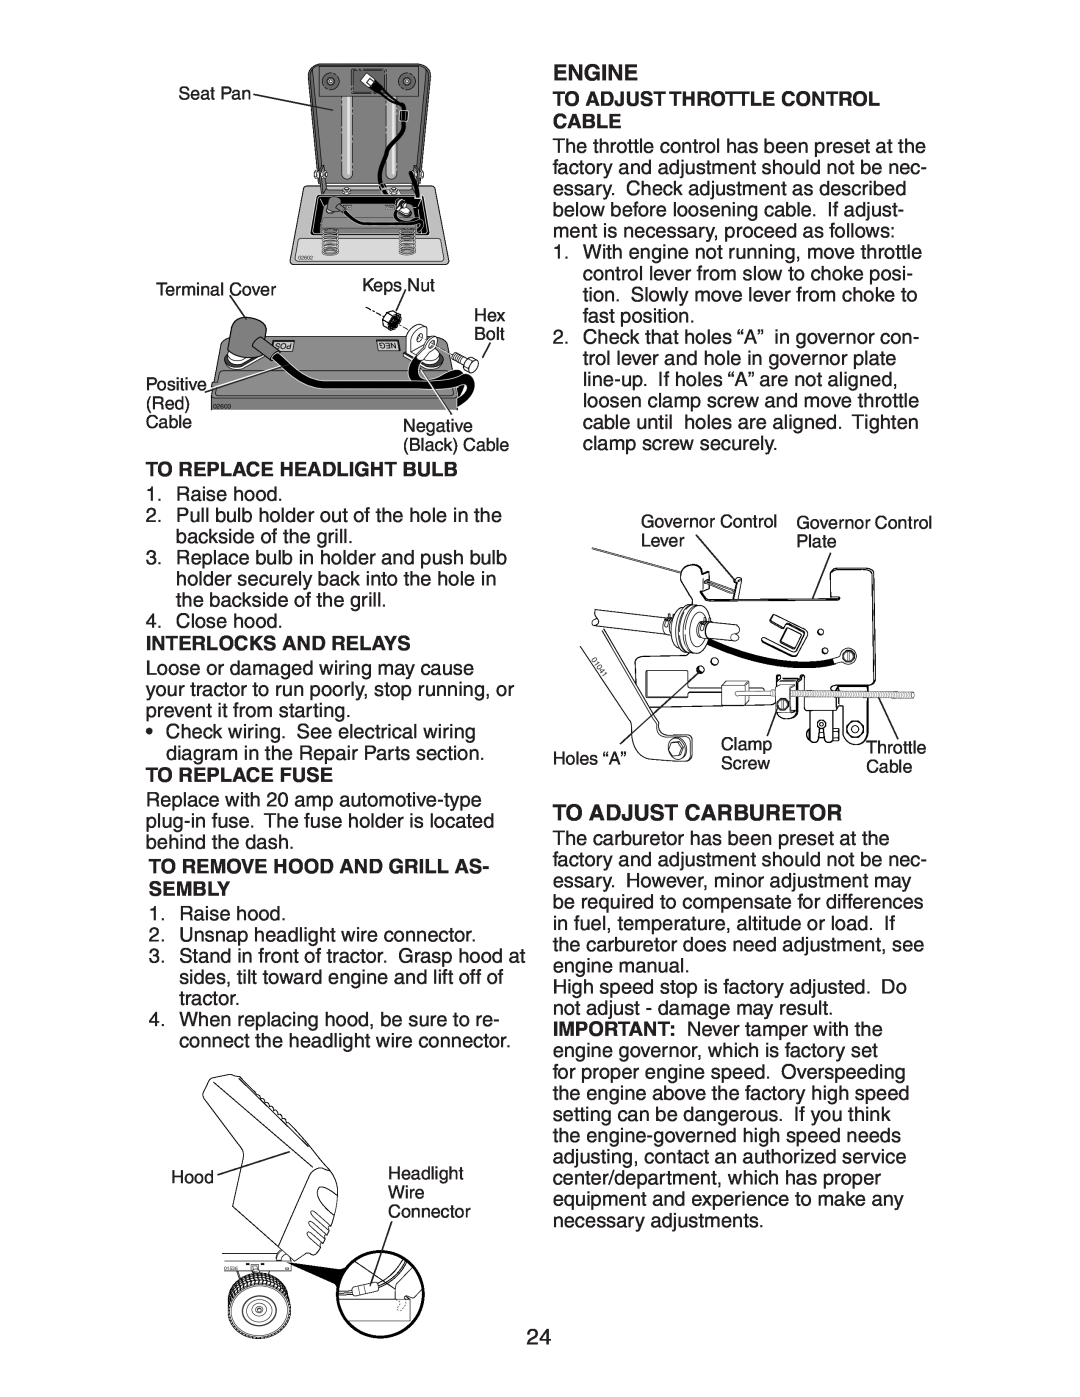 Poulan 271490 manual To Replace Headlight Bulb, Interlocks And Relays, To Replace Fuse, To Remove Hood And Grill As- Sembly 